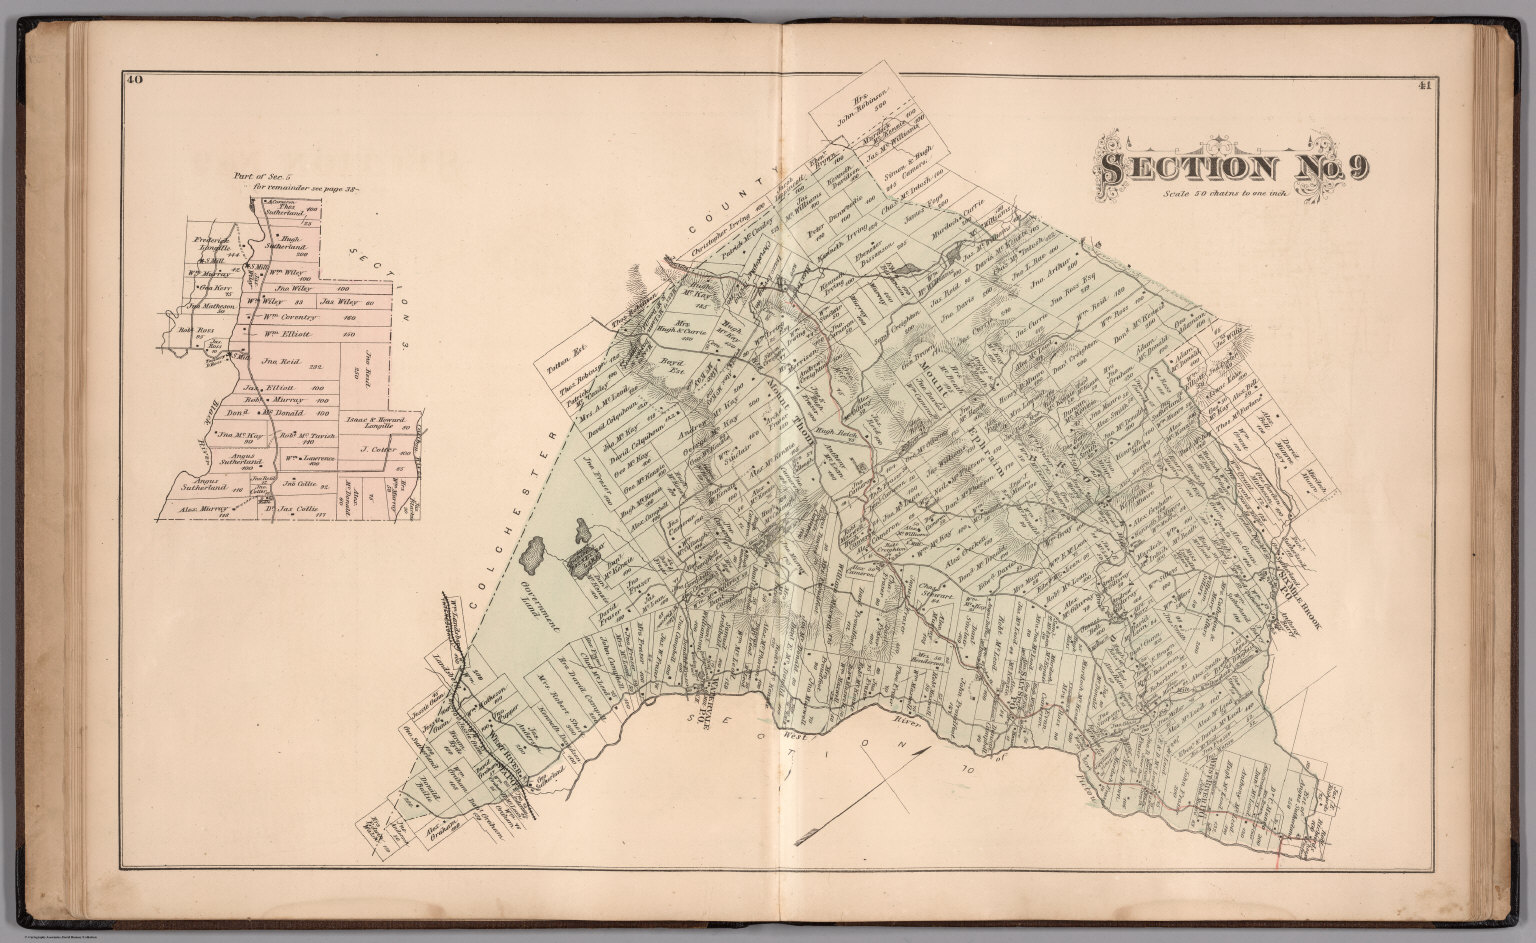 Section No 9 Pictou County Nova Scotia Part Of Section 5 For